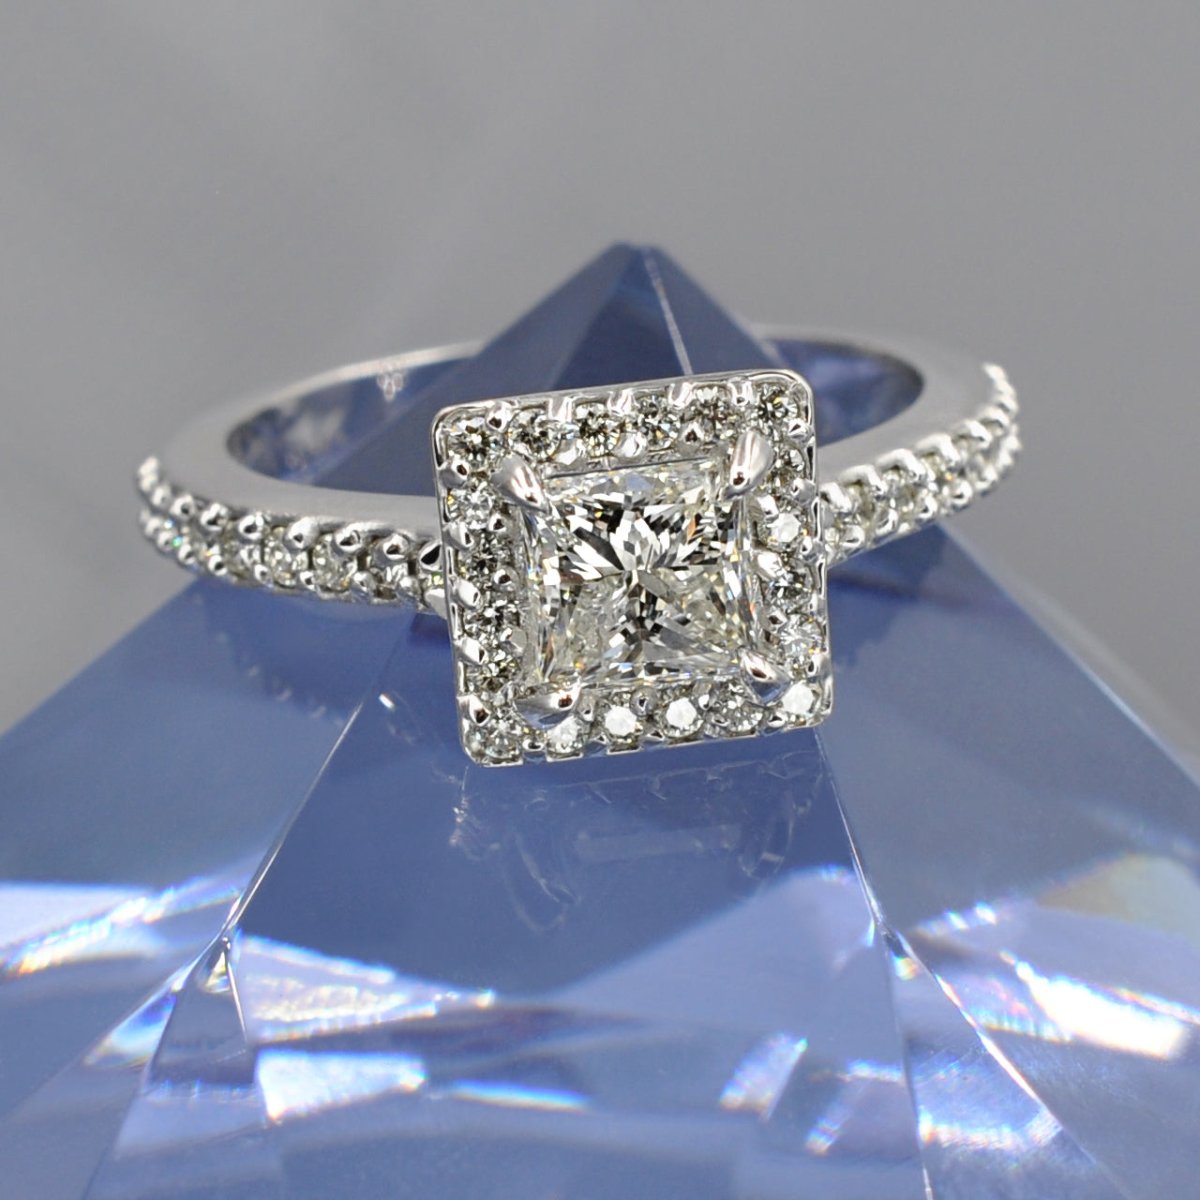 Inexpensive 1.20CT Princess and Round Cut Diamond Engagement Ring in 14KT White Gold - Primestyle.com